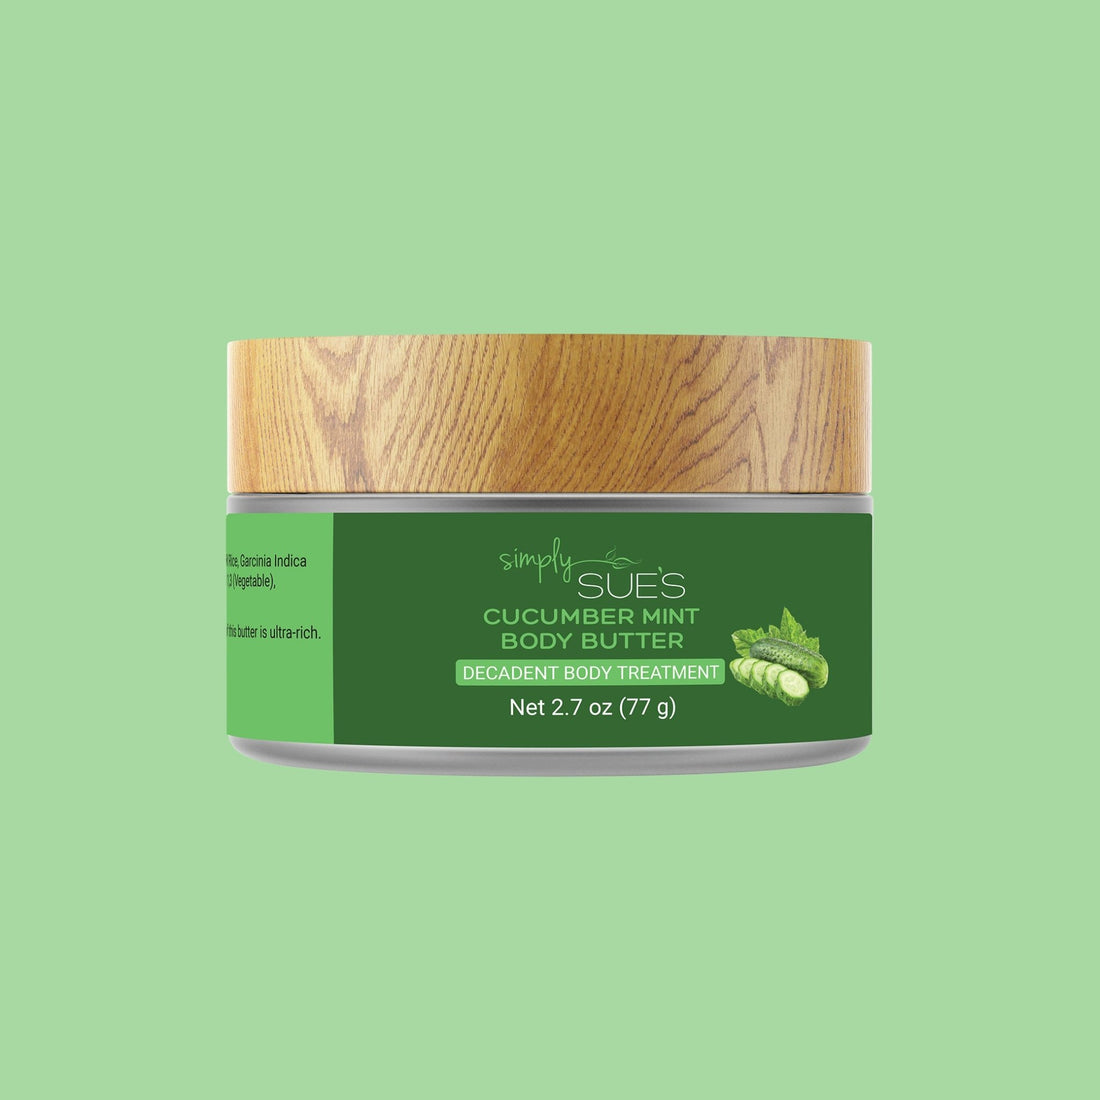 Cucumber Mint Body Butter for dry skin elegantly packaged in recyclable glass jar with bamboo cap from Simply Sue&